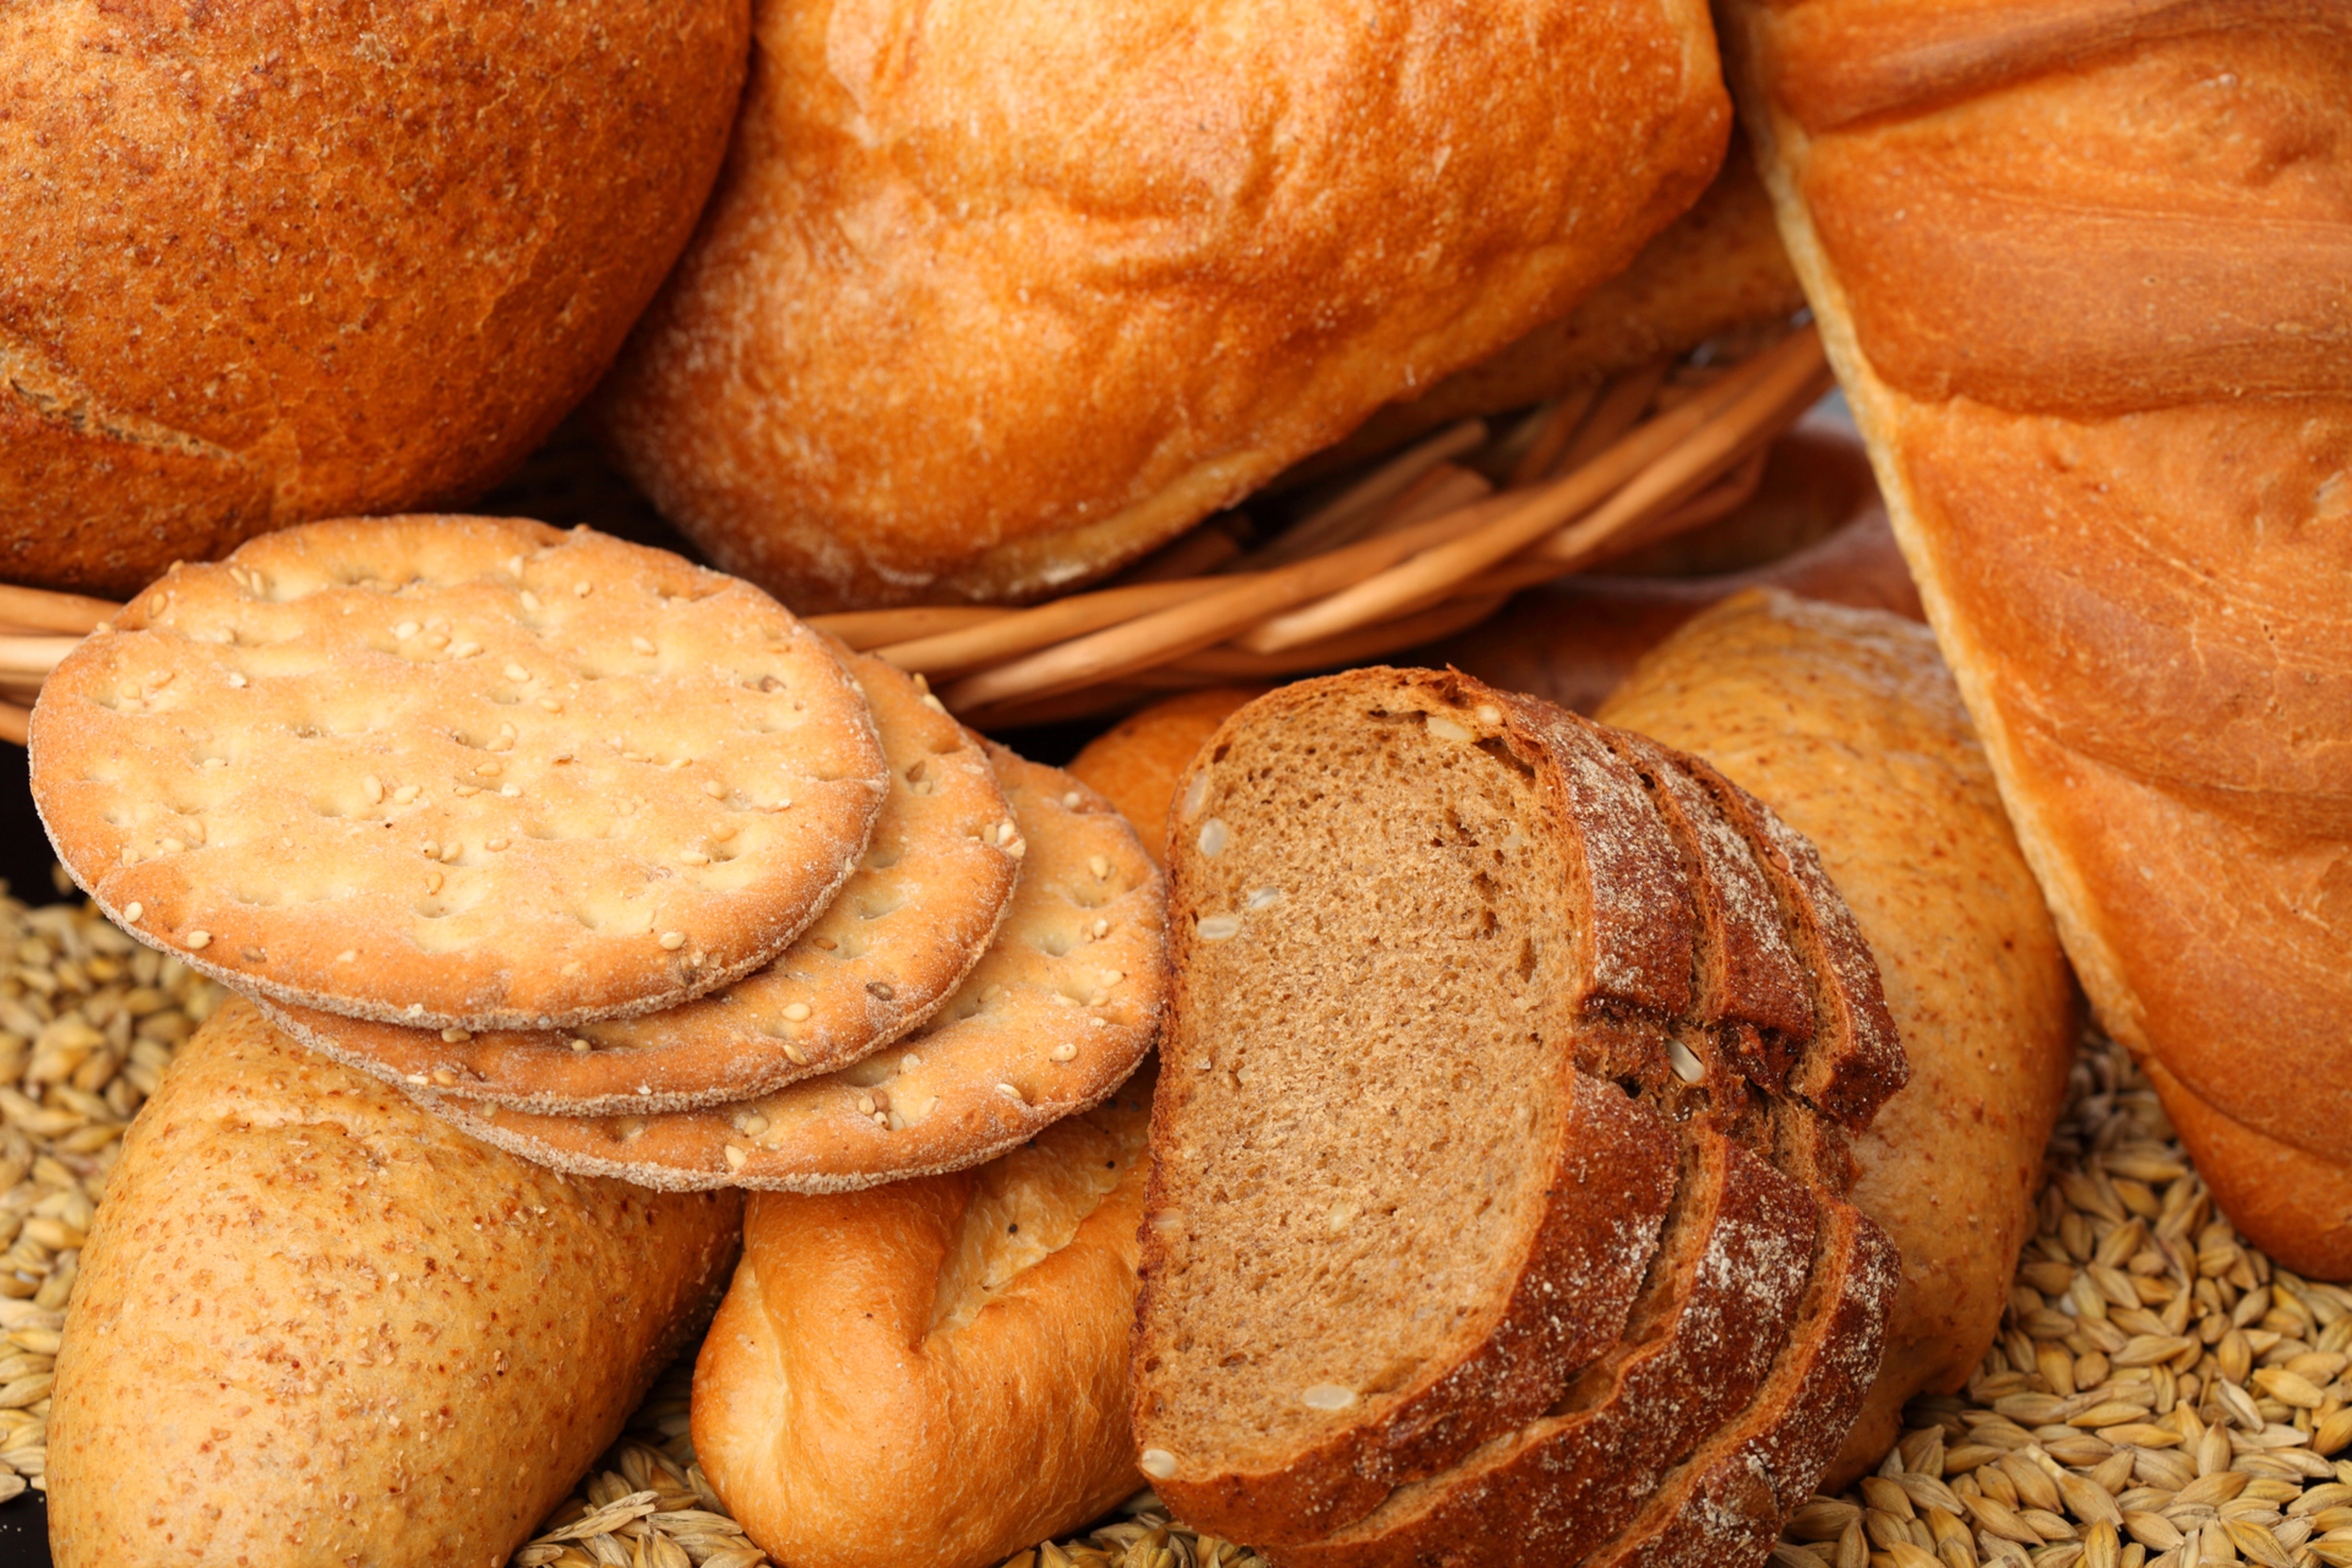 baked cookies and breads, grain, cakes, chunks, cumin, food, food and drink